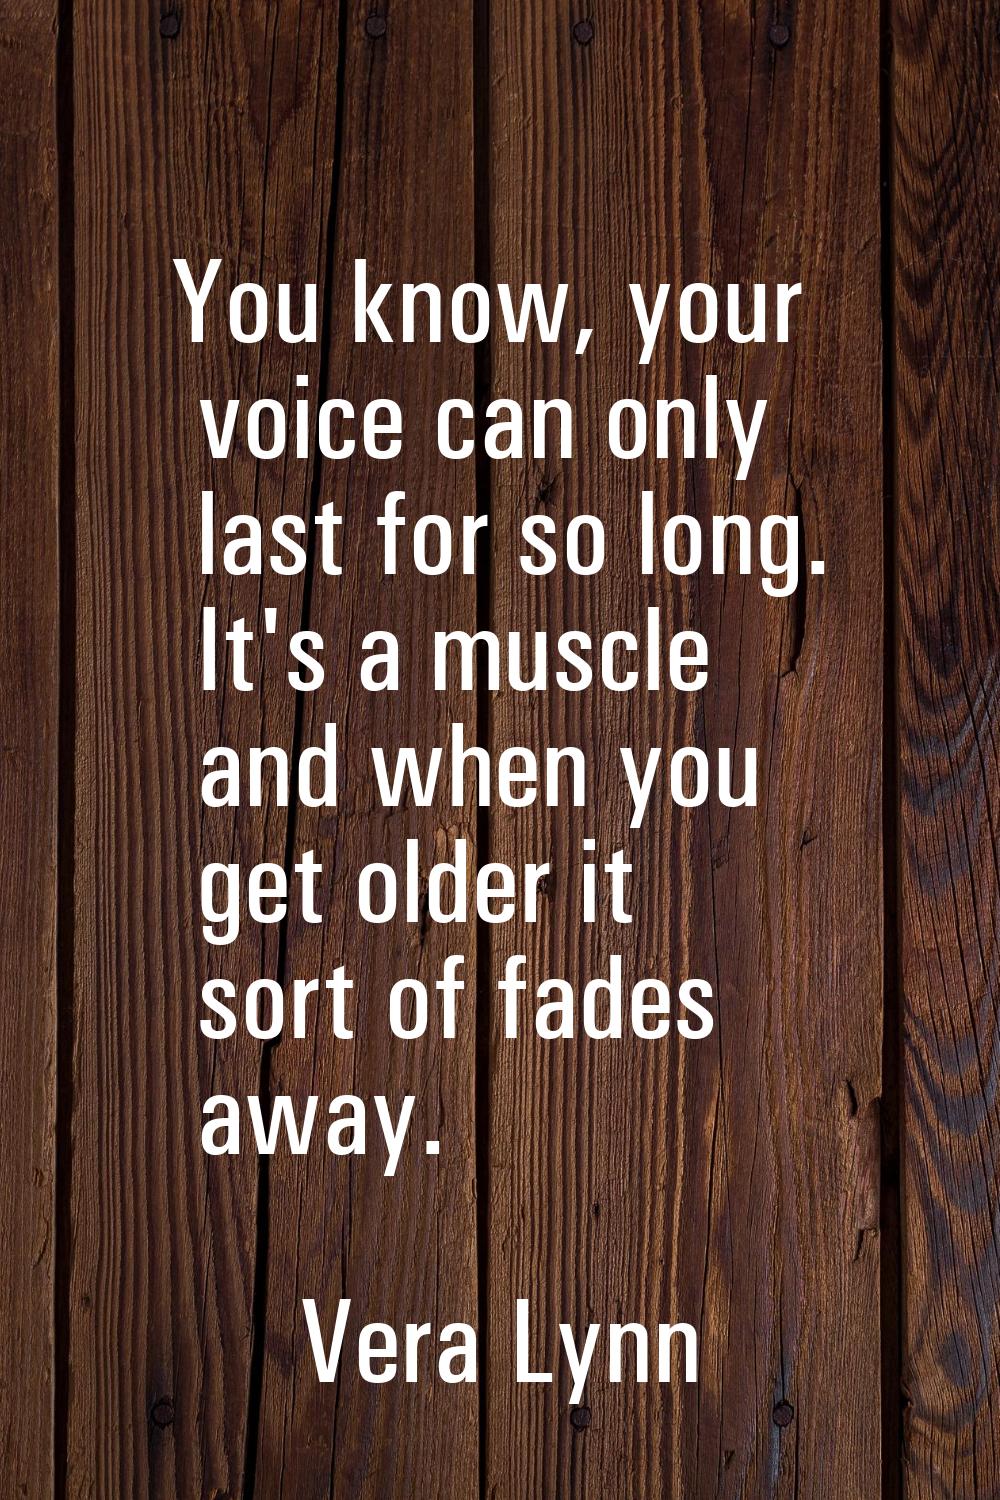 You know, your voice can only last for so long. It's a muscle and when you get older it sort of fad